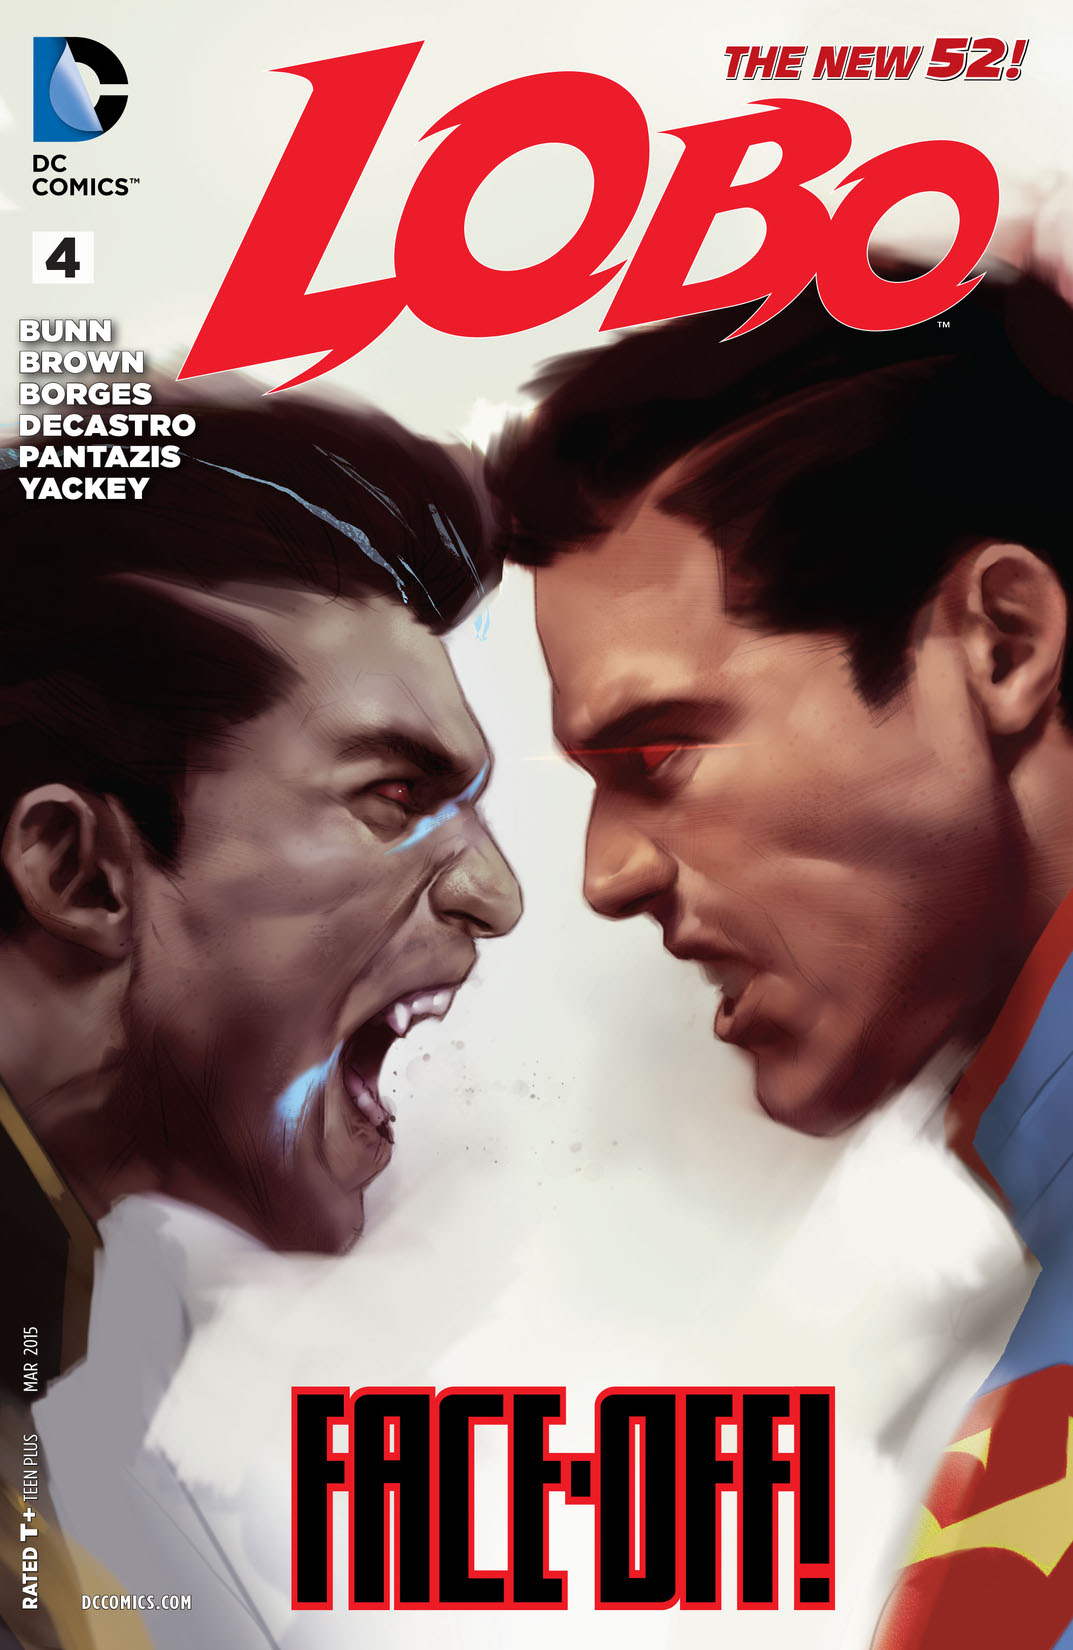 Lobo (2014-) #4 preview images